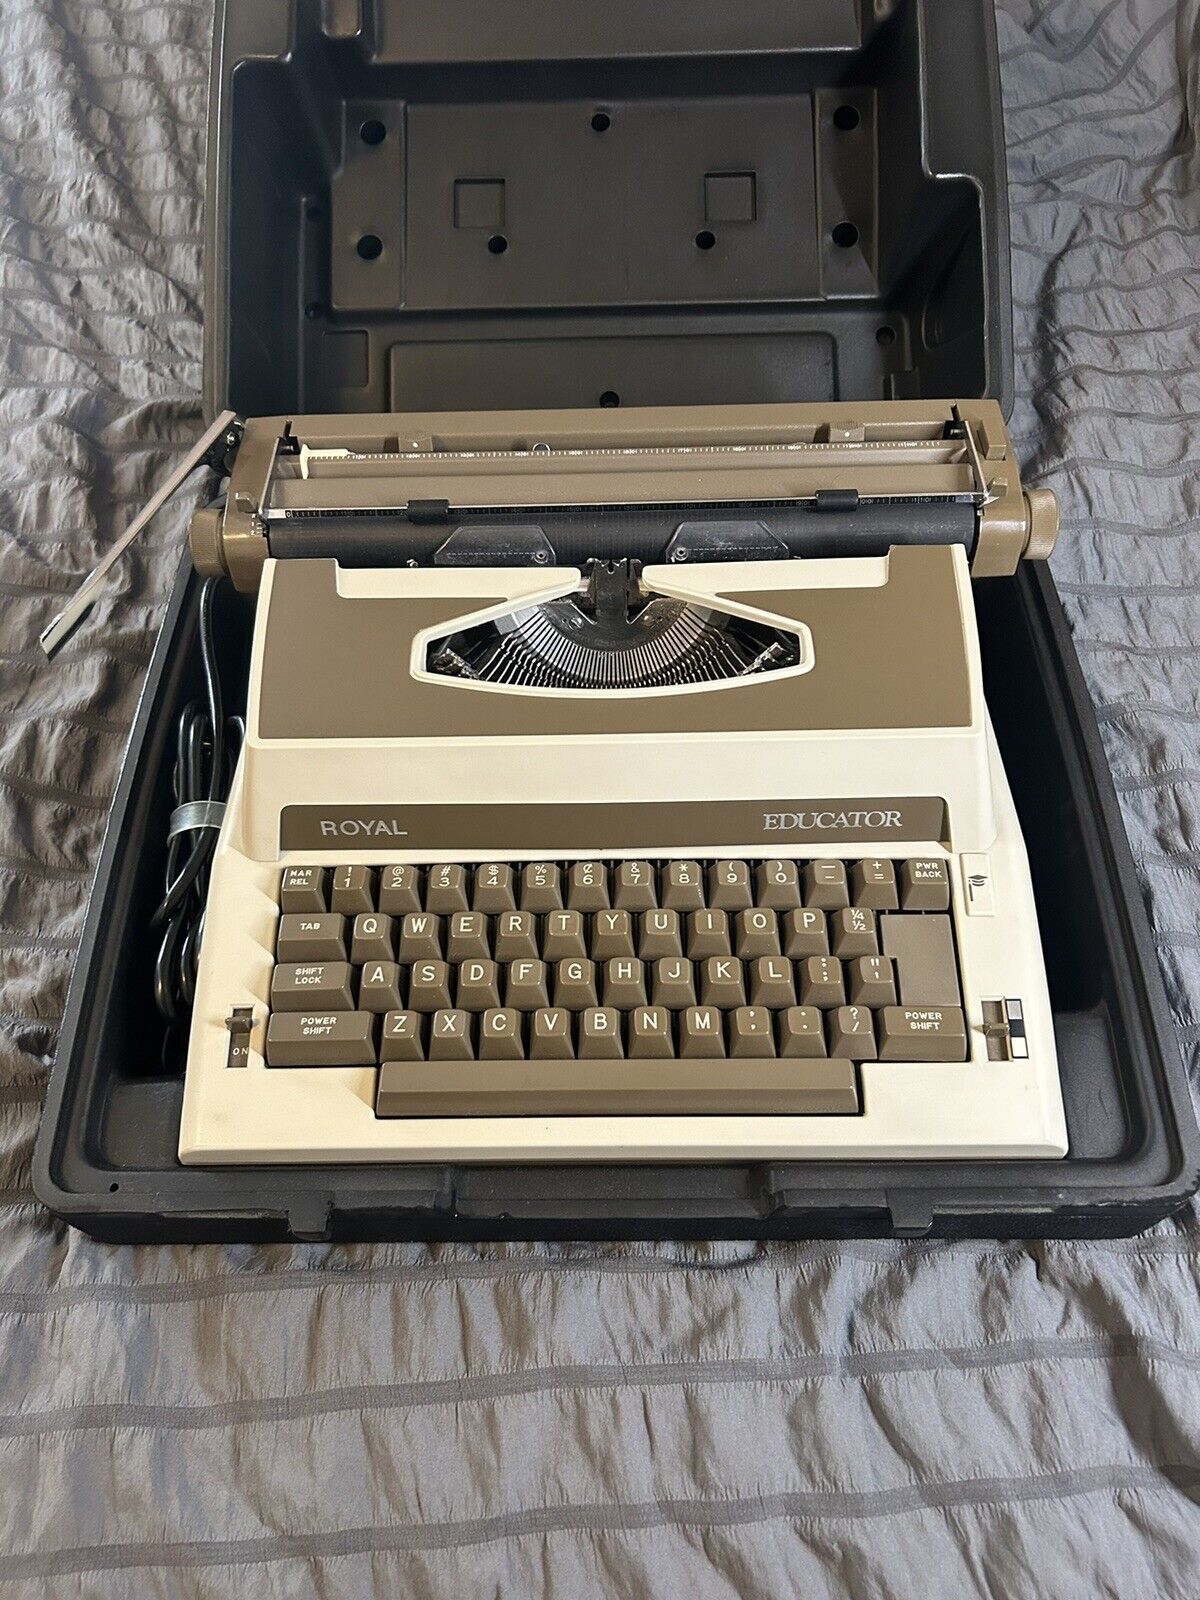 Vintage Japan Royal Educator Portable Electric Typewriter With Case Tested Works